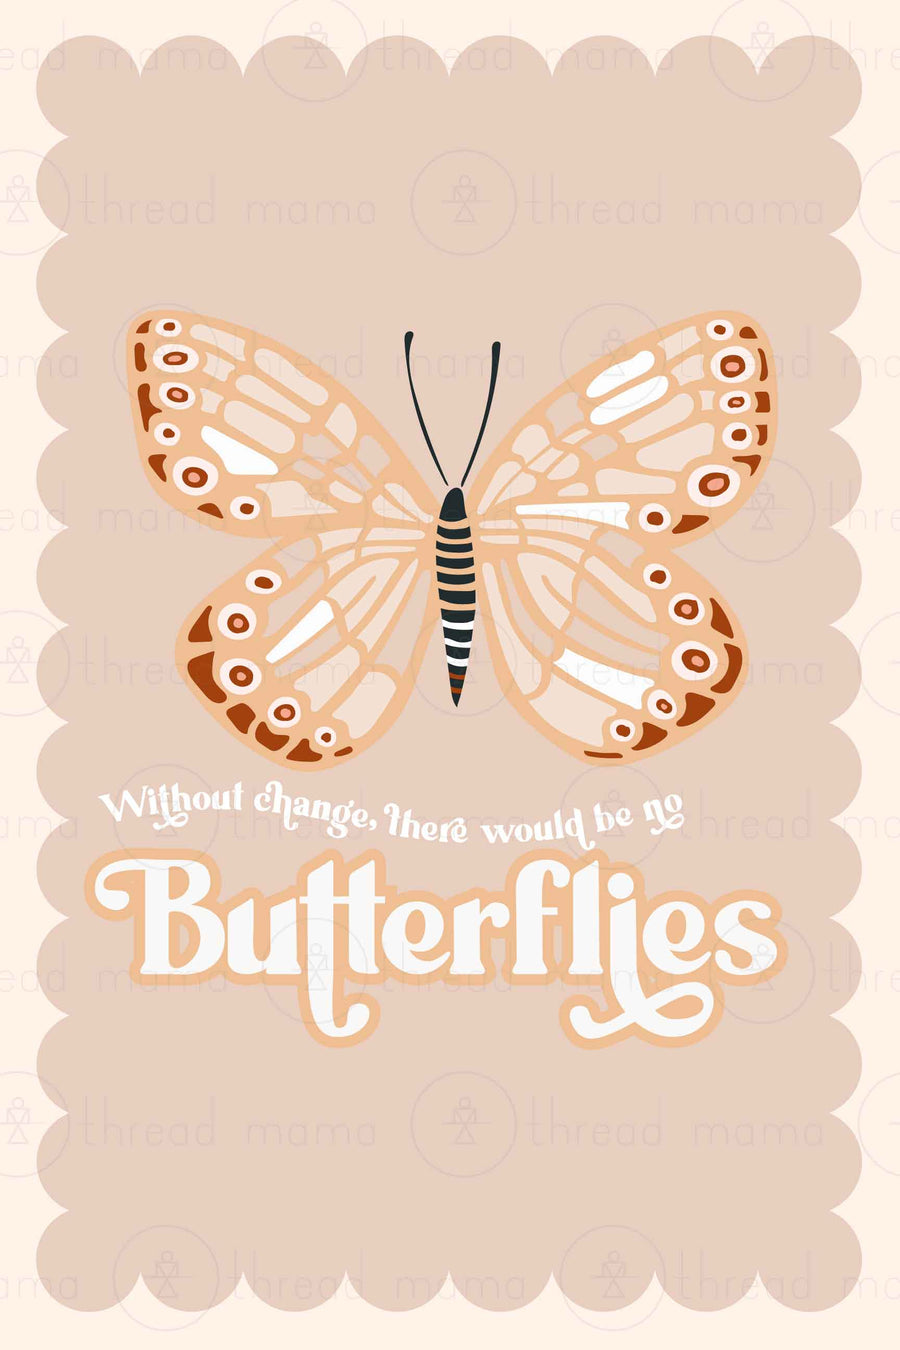 Without Change, No Butterflies (Printable Poster)